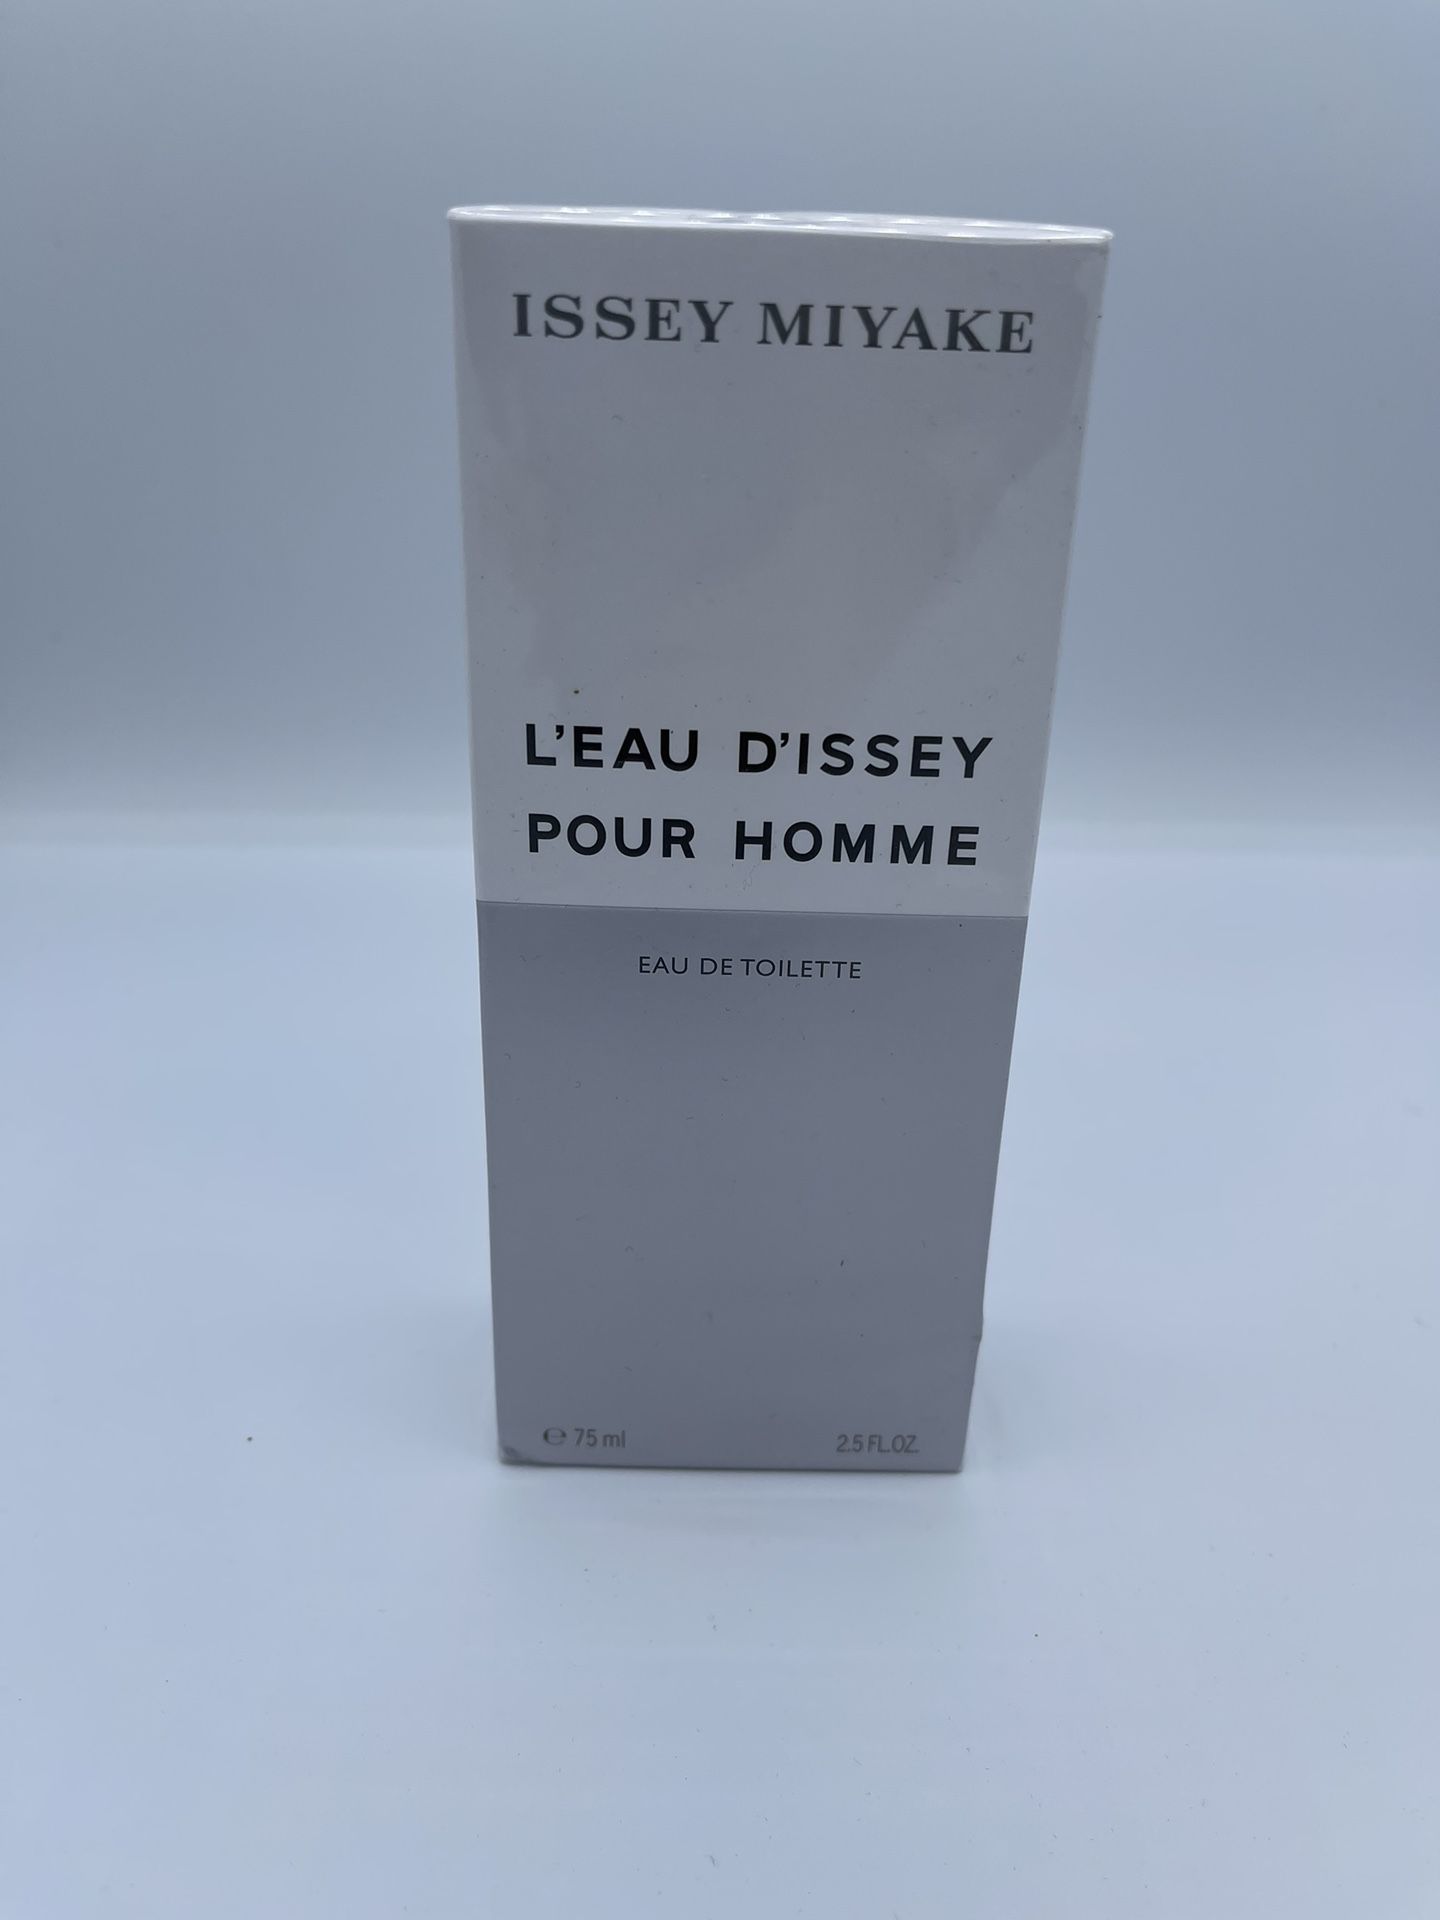 L'EAU D'ISSEY by Issey Miyake (MEN) 2.5 fl oz - New in Sealed Box